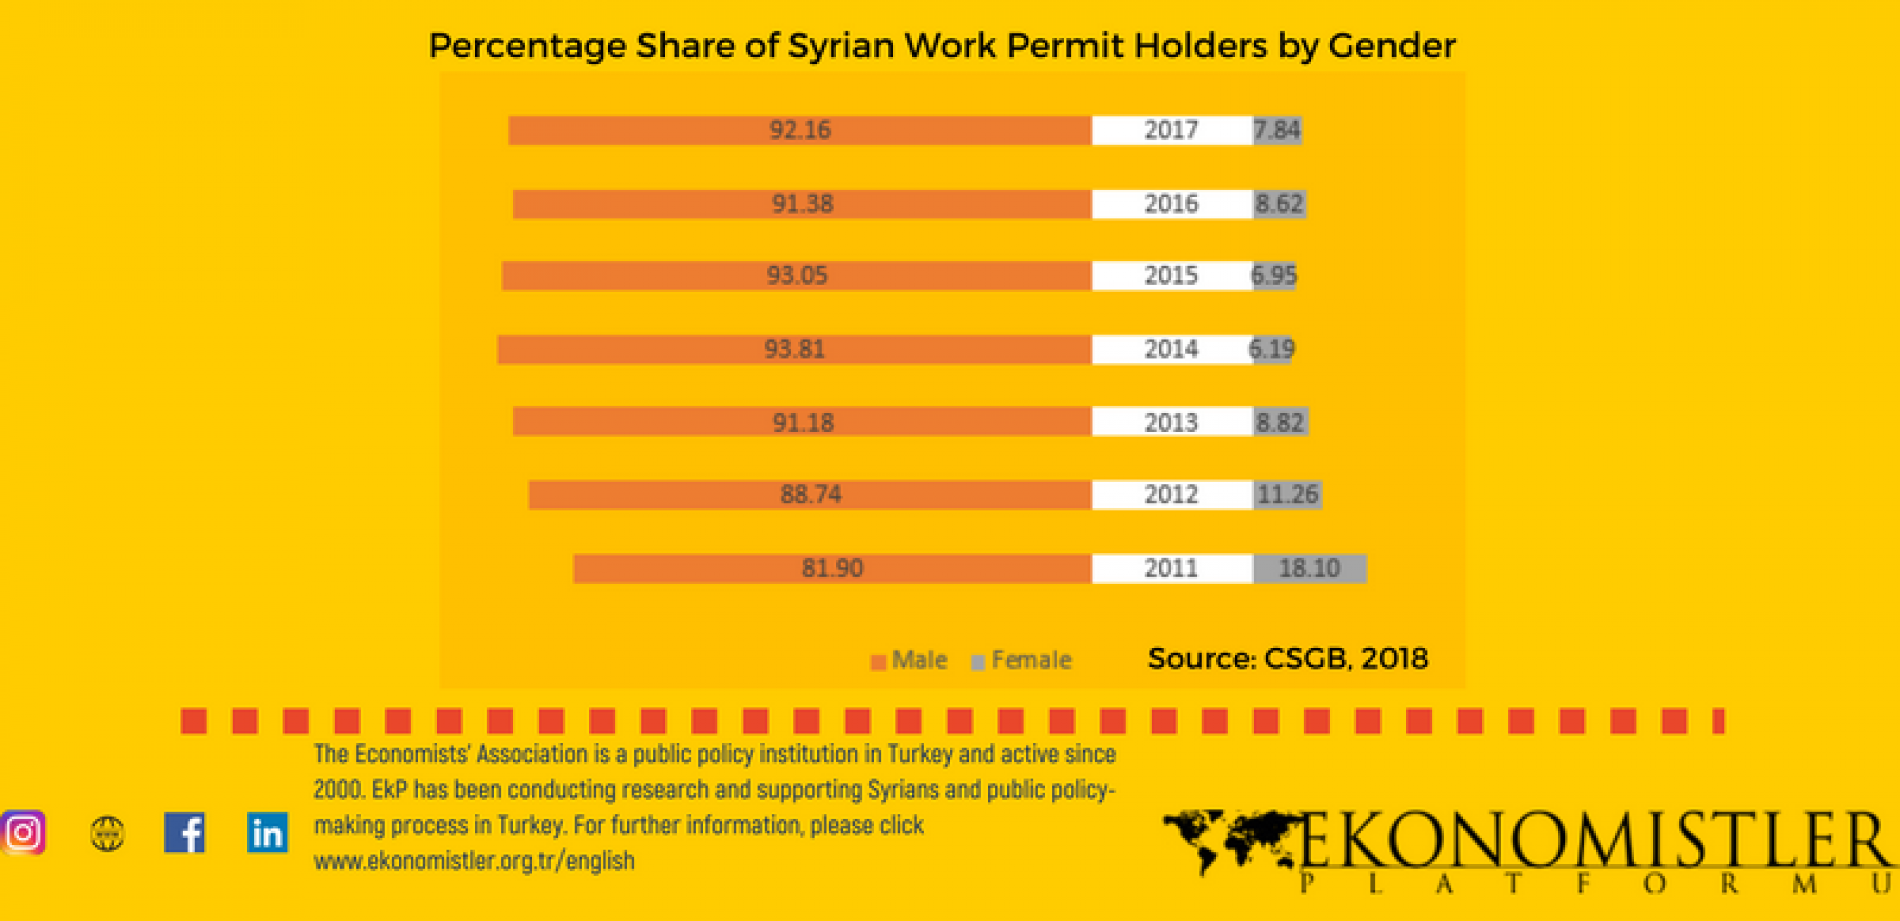 Labor Market Situation of Syrians in Turkey